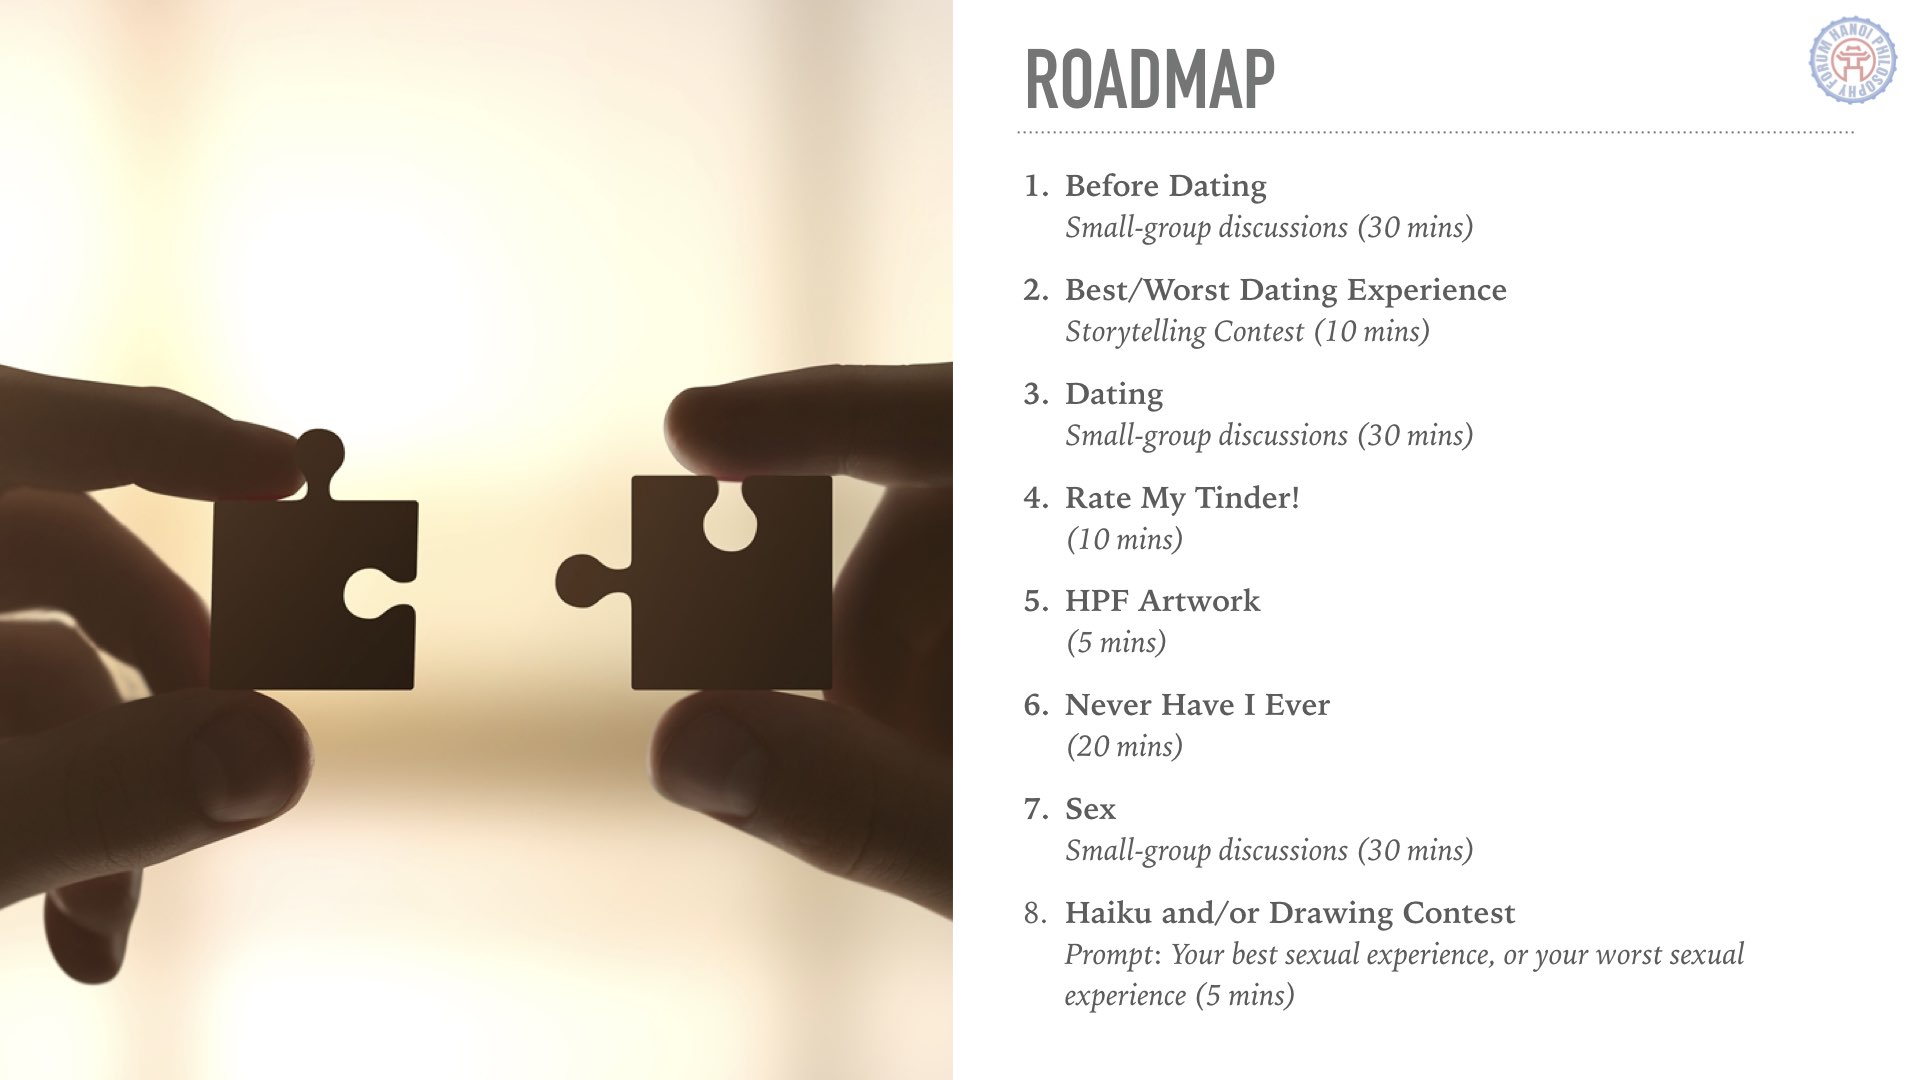 2019.06.03-04 The Rules of Dating, Sex, and Consent Roadmap SM.001.jpeg